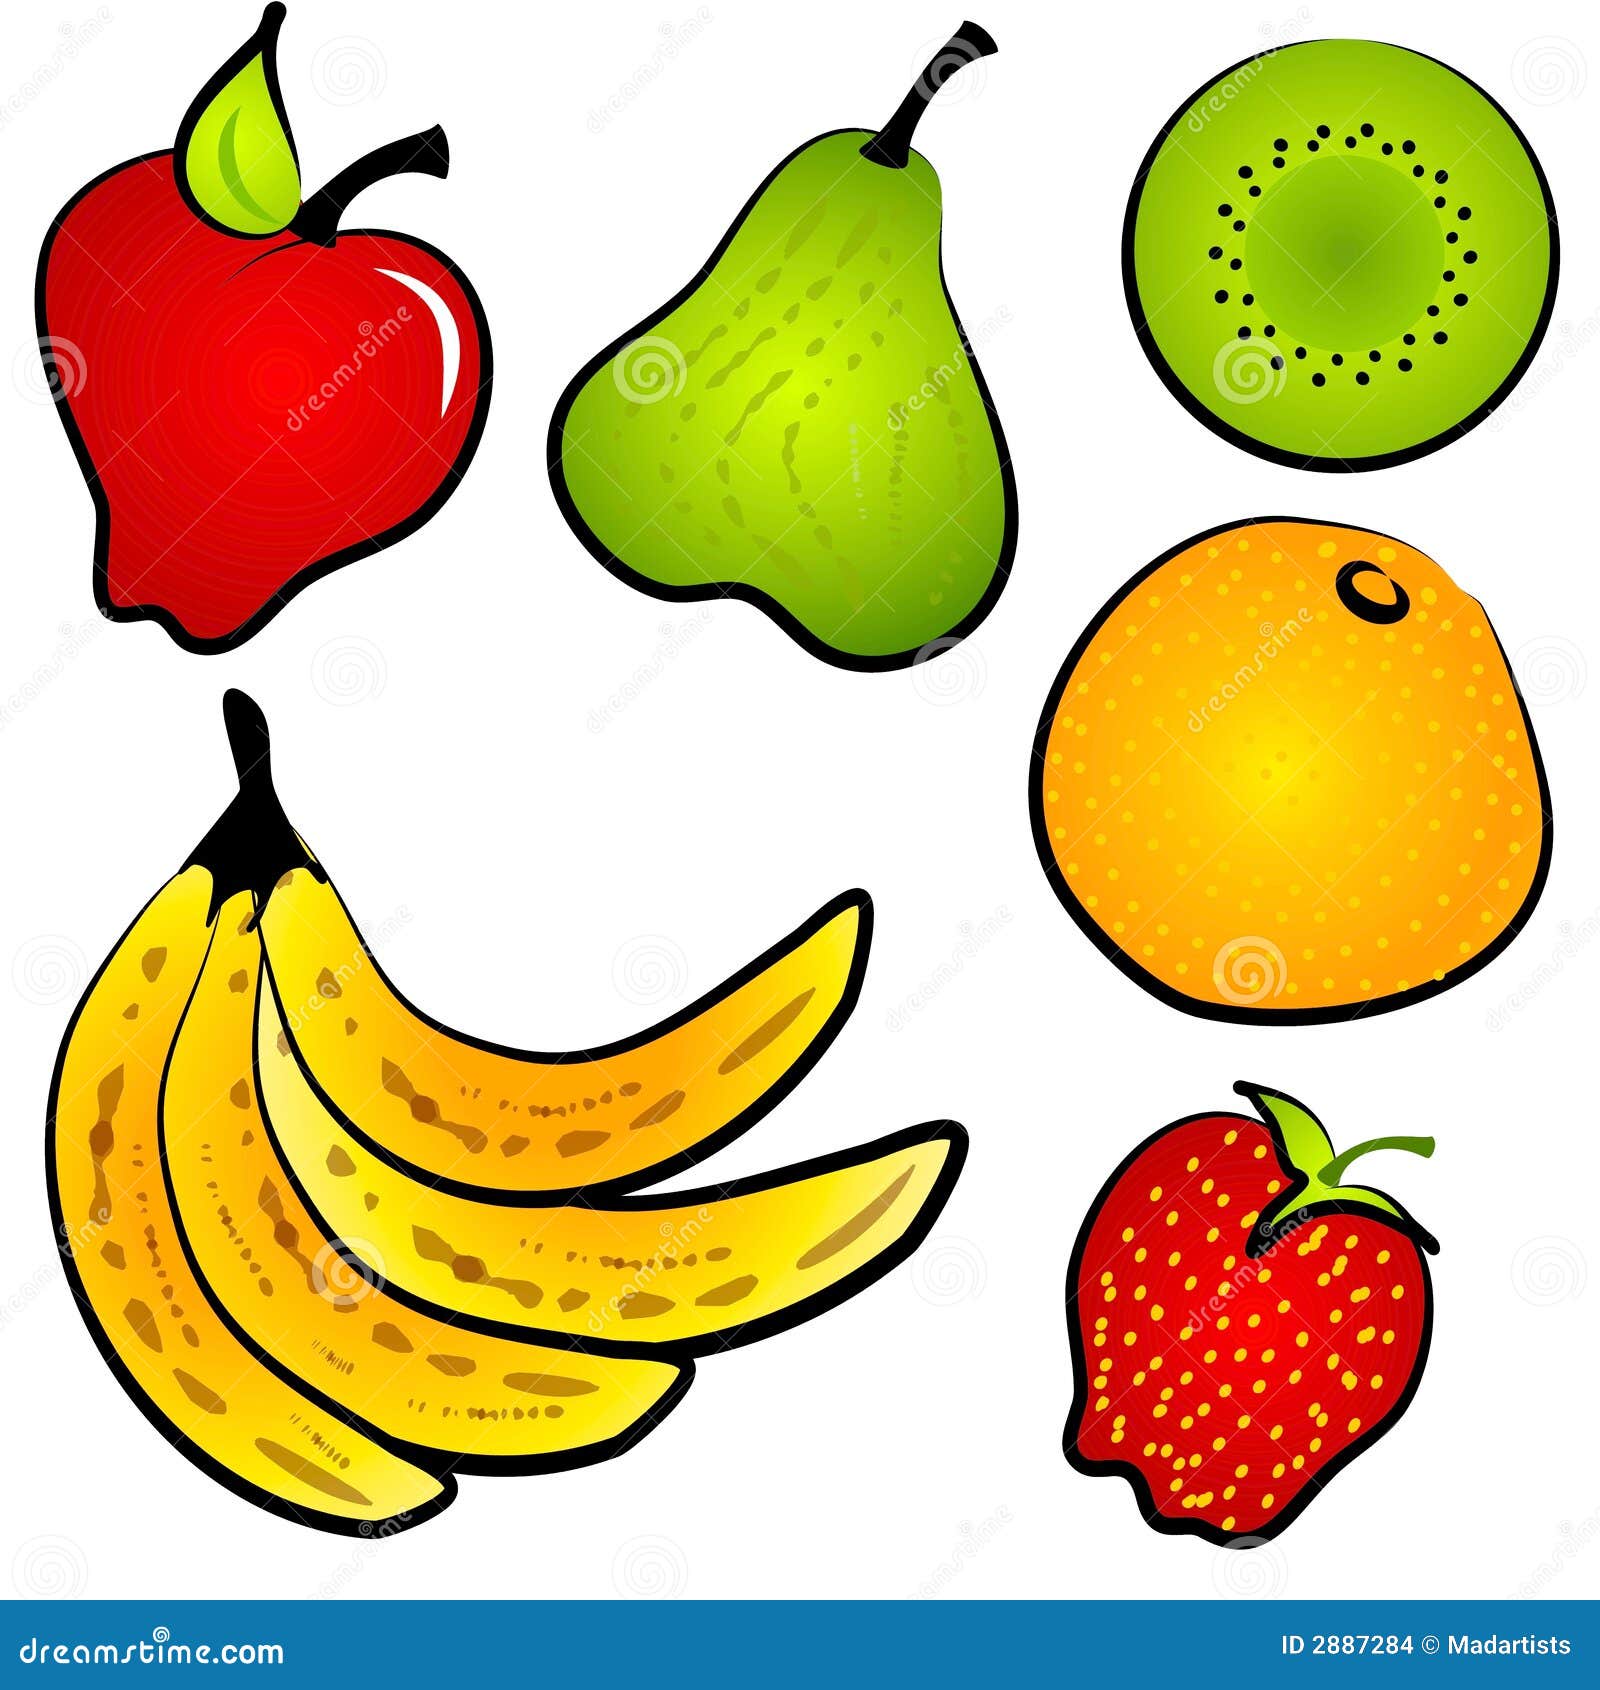 Healty Food Fruit Clip Art Stock Images - Image: 2887284